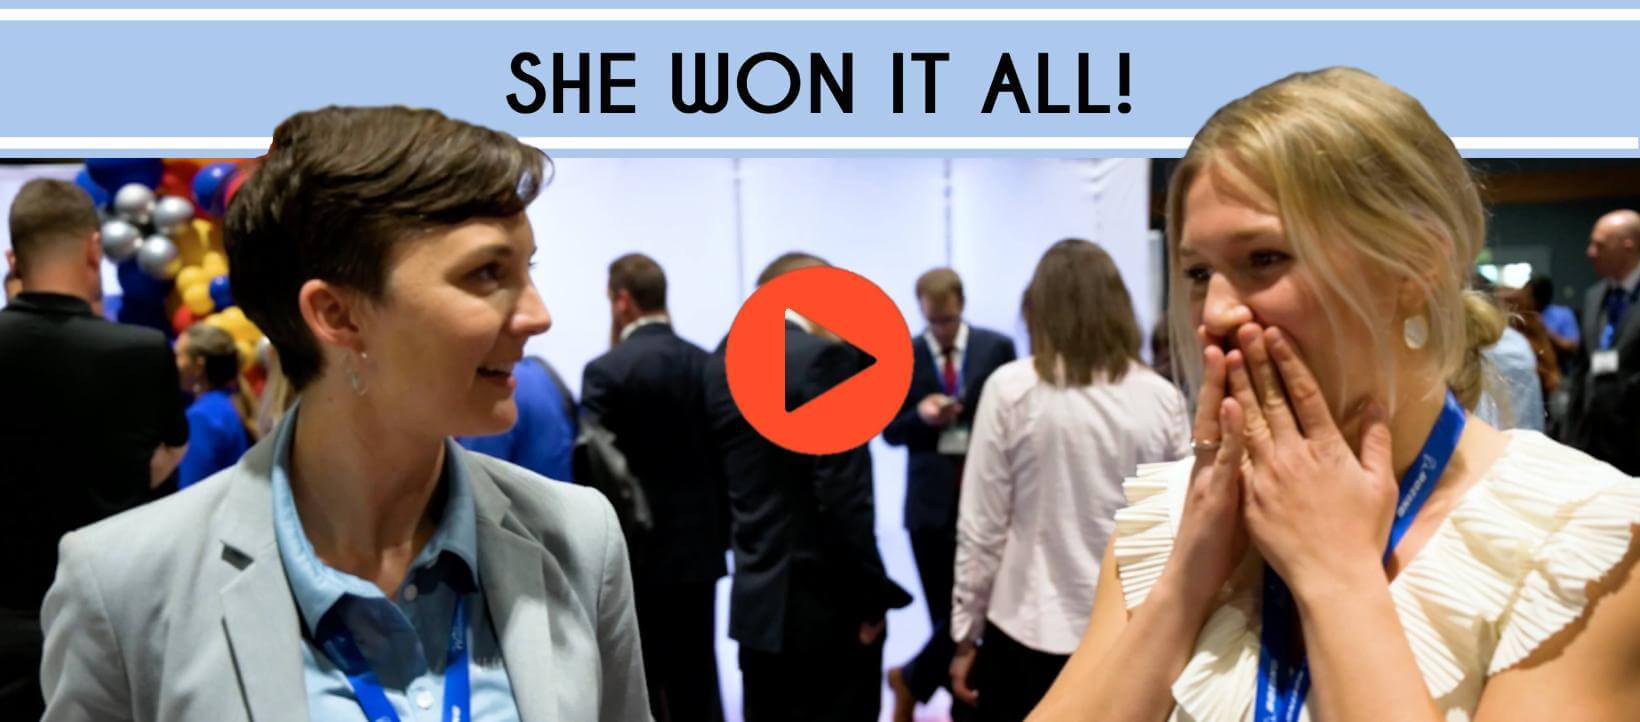 Abingdon Co. Image displays Video Thumbnail for a YouTube Episode on what it's like to win the scholarship.  Two women standing at an event and the younger one has her hands up to her mouth in surprise